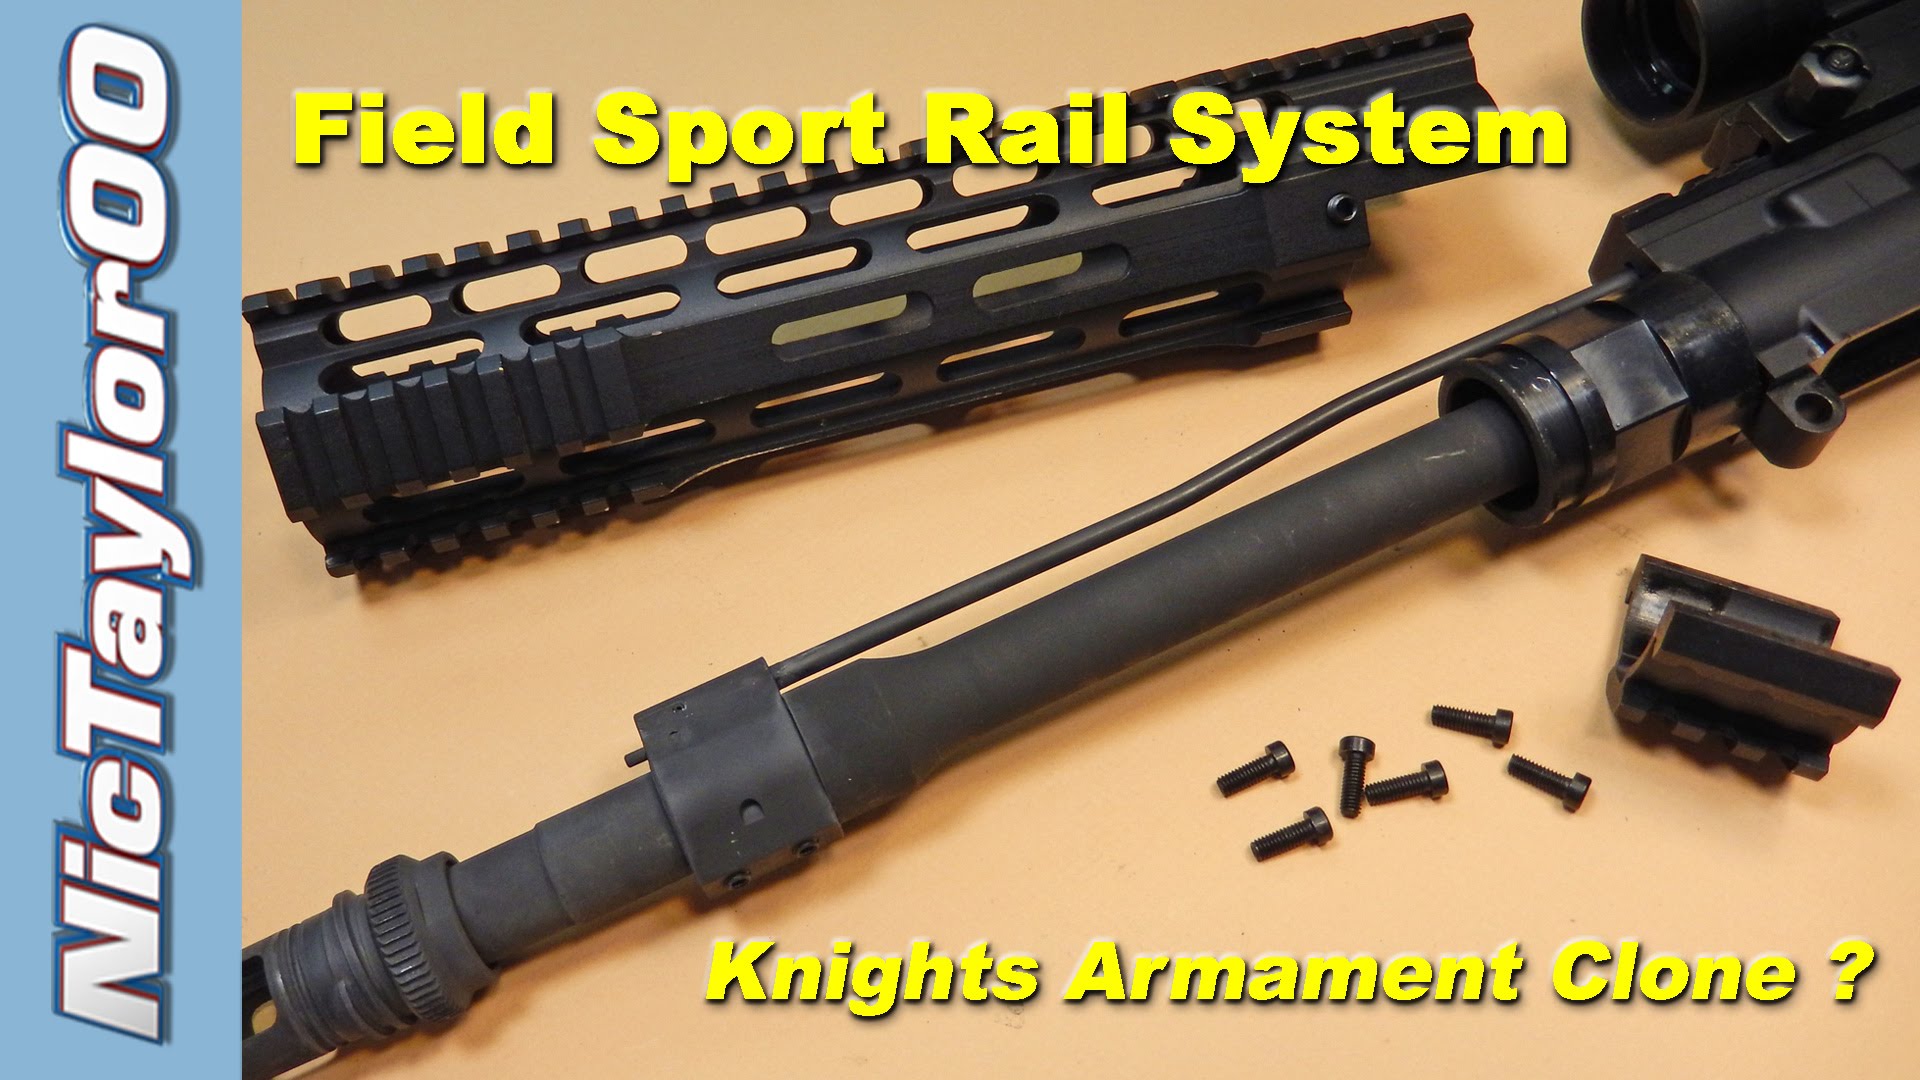 Field Sport AR15 Handguard REVIEW & Install Instructions - VERY EASY